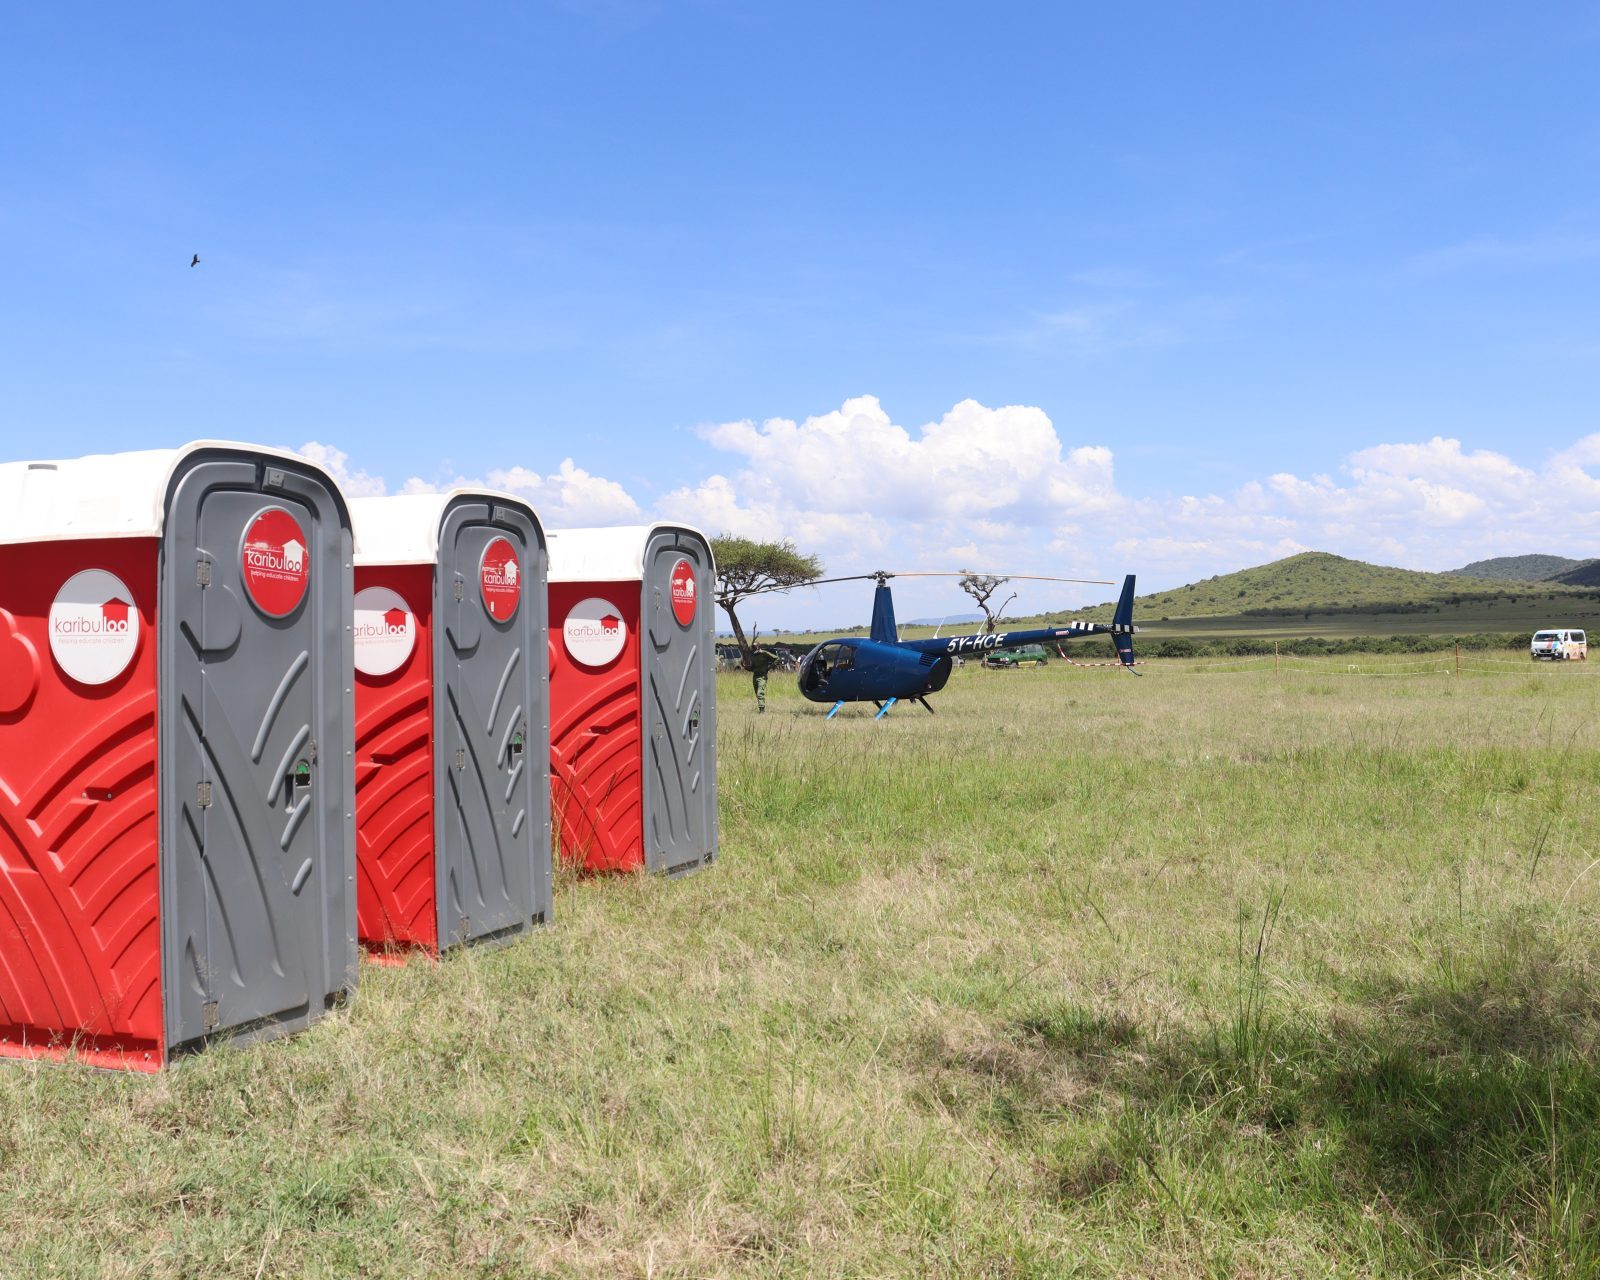 How Portable Toilets Can Support Disaster Relief and Humanitarian Aid Efforts